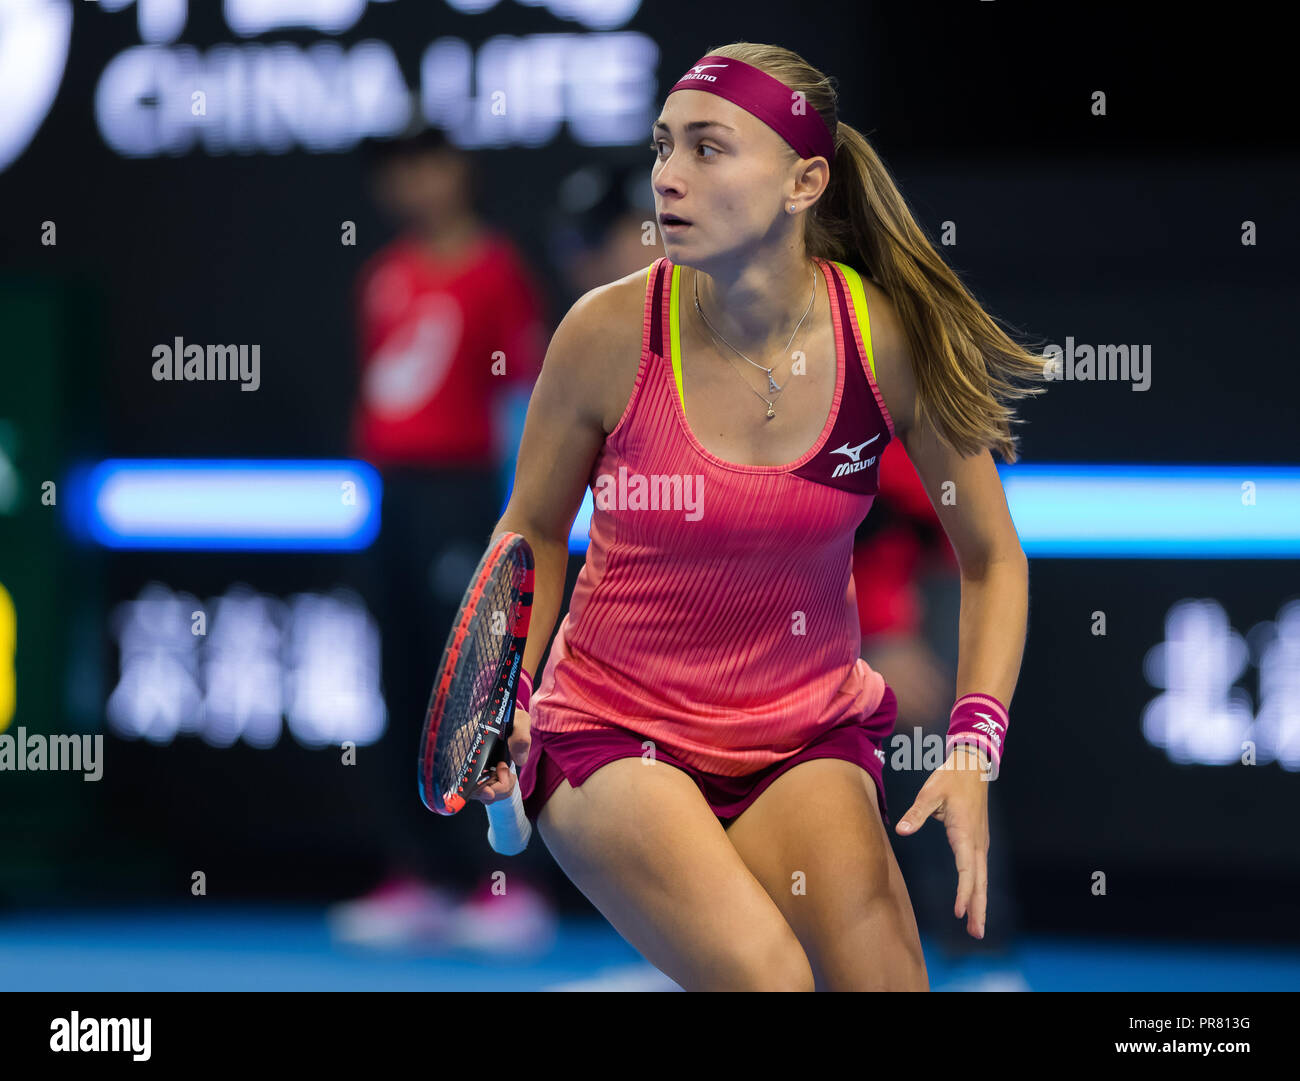 September 29, 2018 - Aleksandra Krunic of Serbia in action during her  first-round match at the 2018 China Open WTA Premier Mandatory tennis  tournament Credit: AFP7/ZUMA Wire/Alamy Live News Stock Photo - Alamy